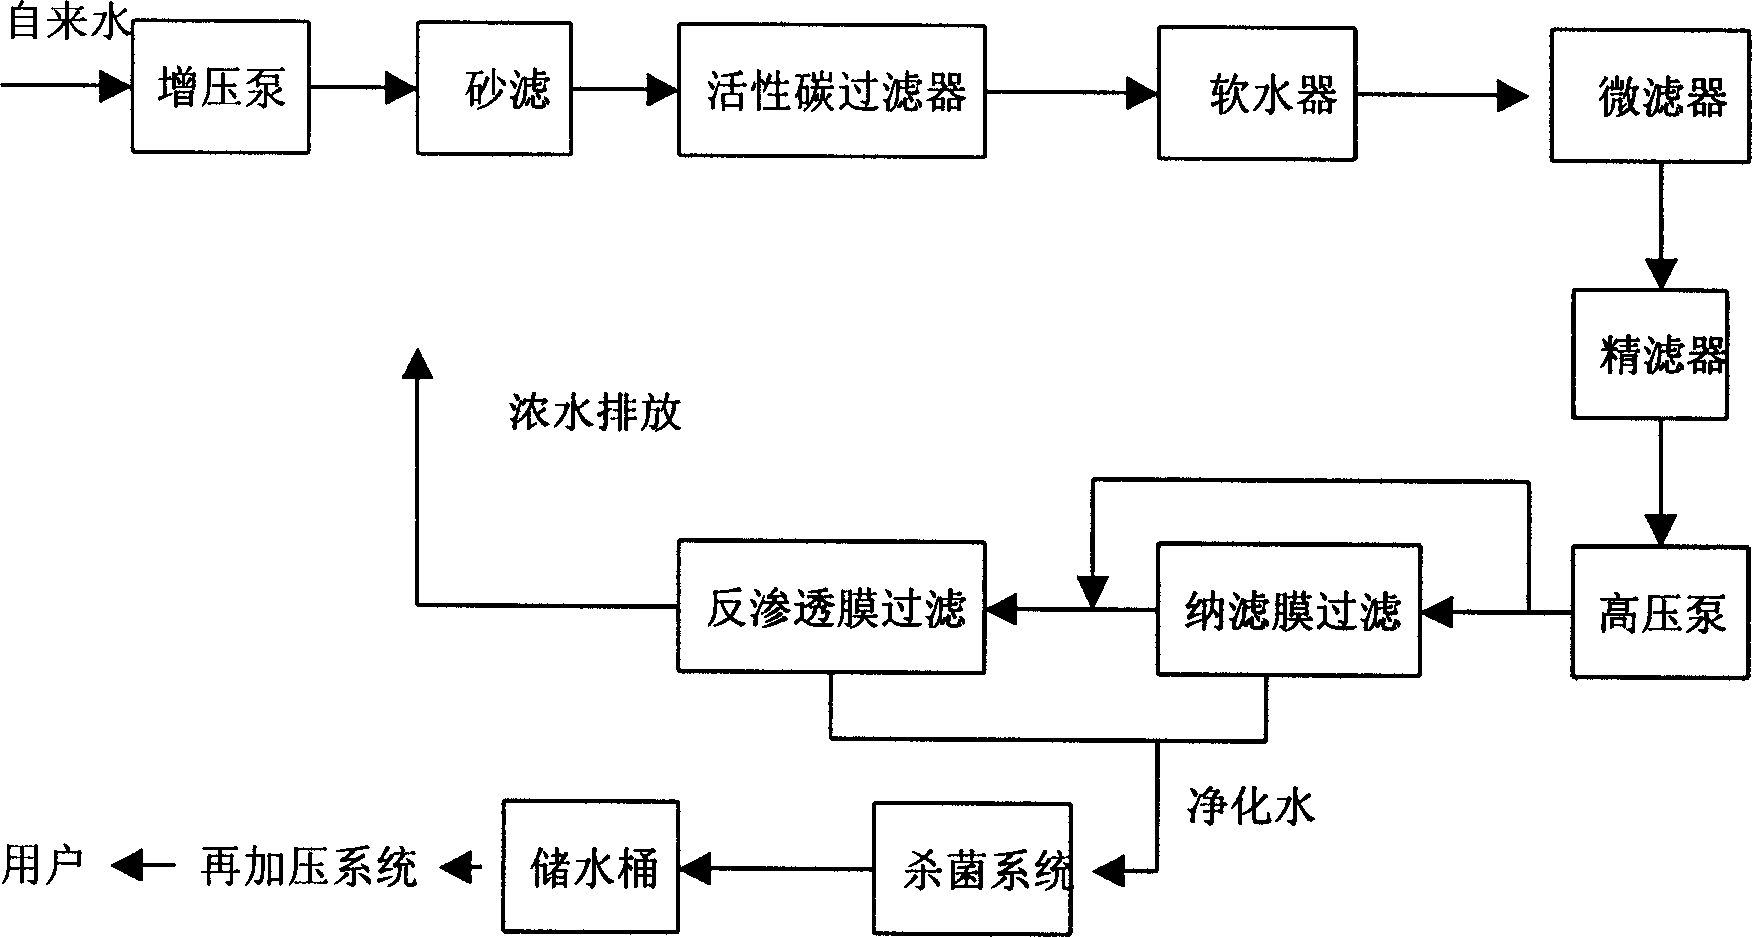 Production process and system of piped drinking water